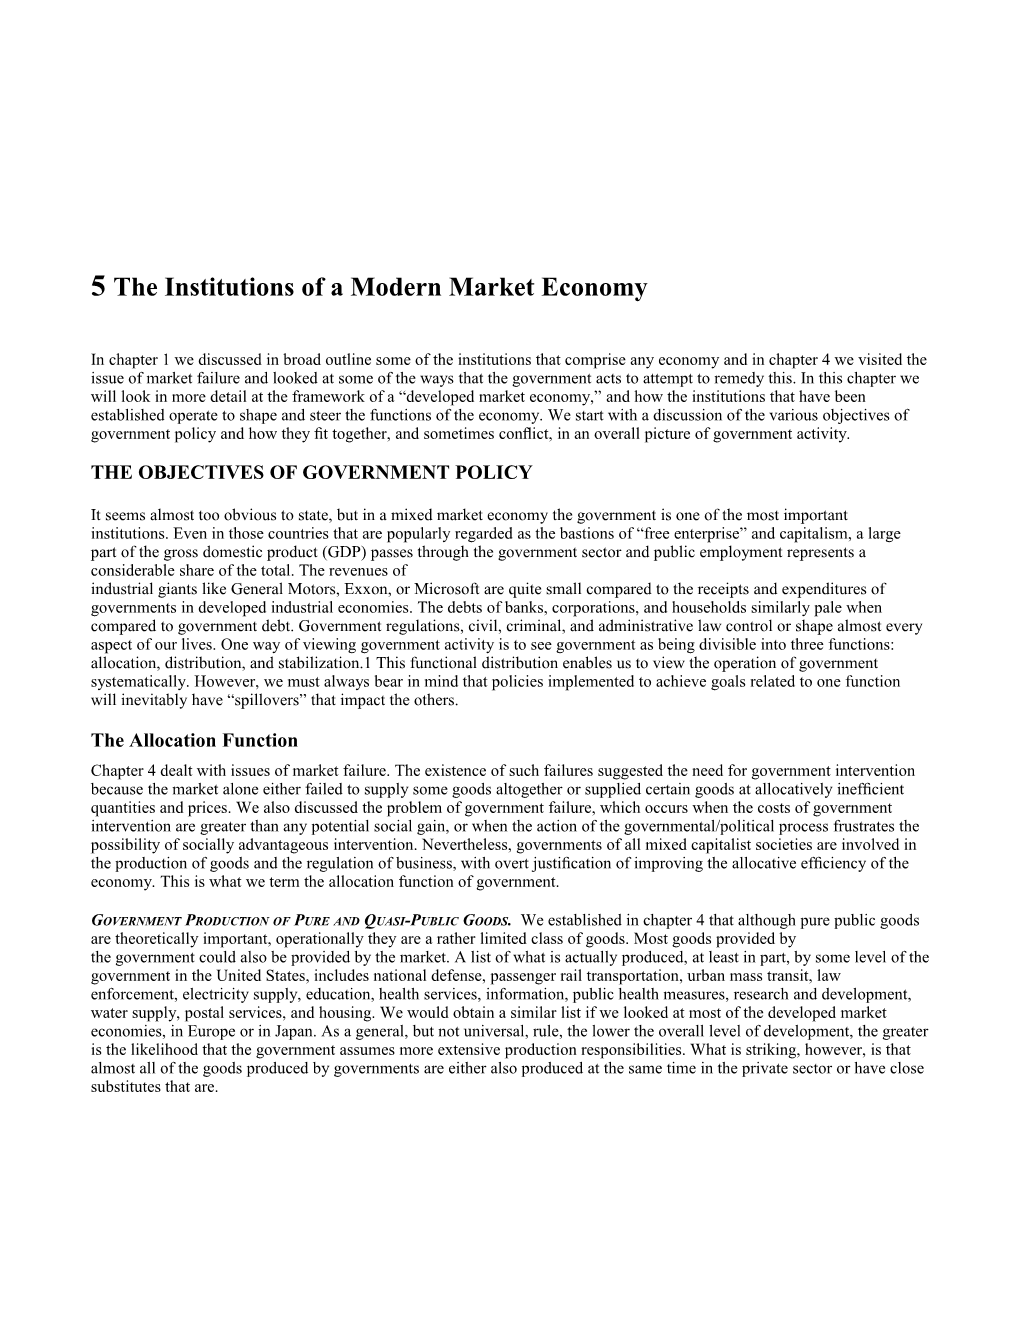 In Chapter 1 We Discussed in Broad Outline Some of the Institutions That Comprise Any Economy